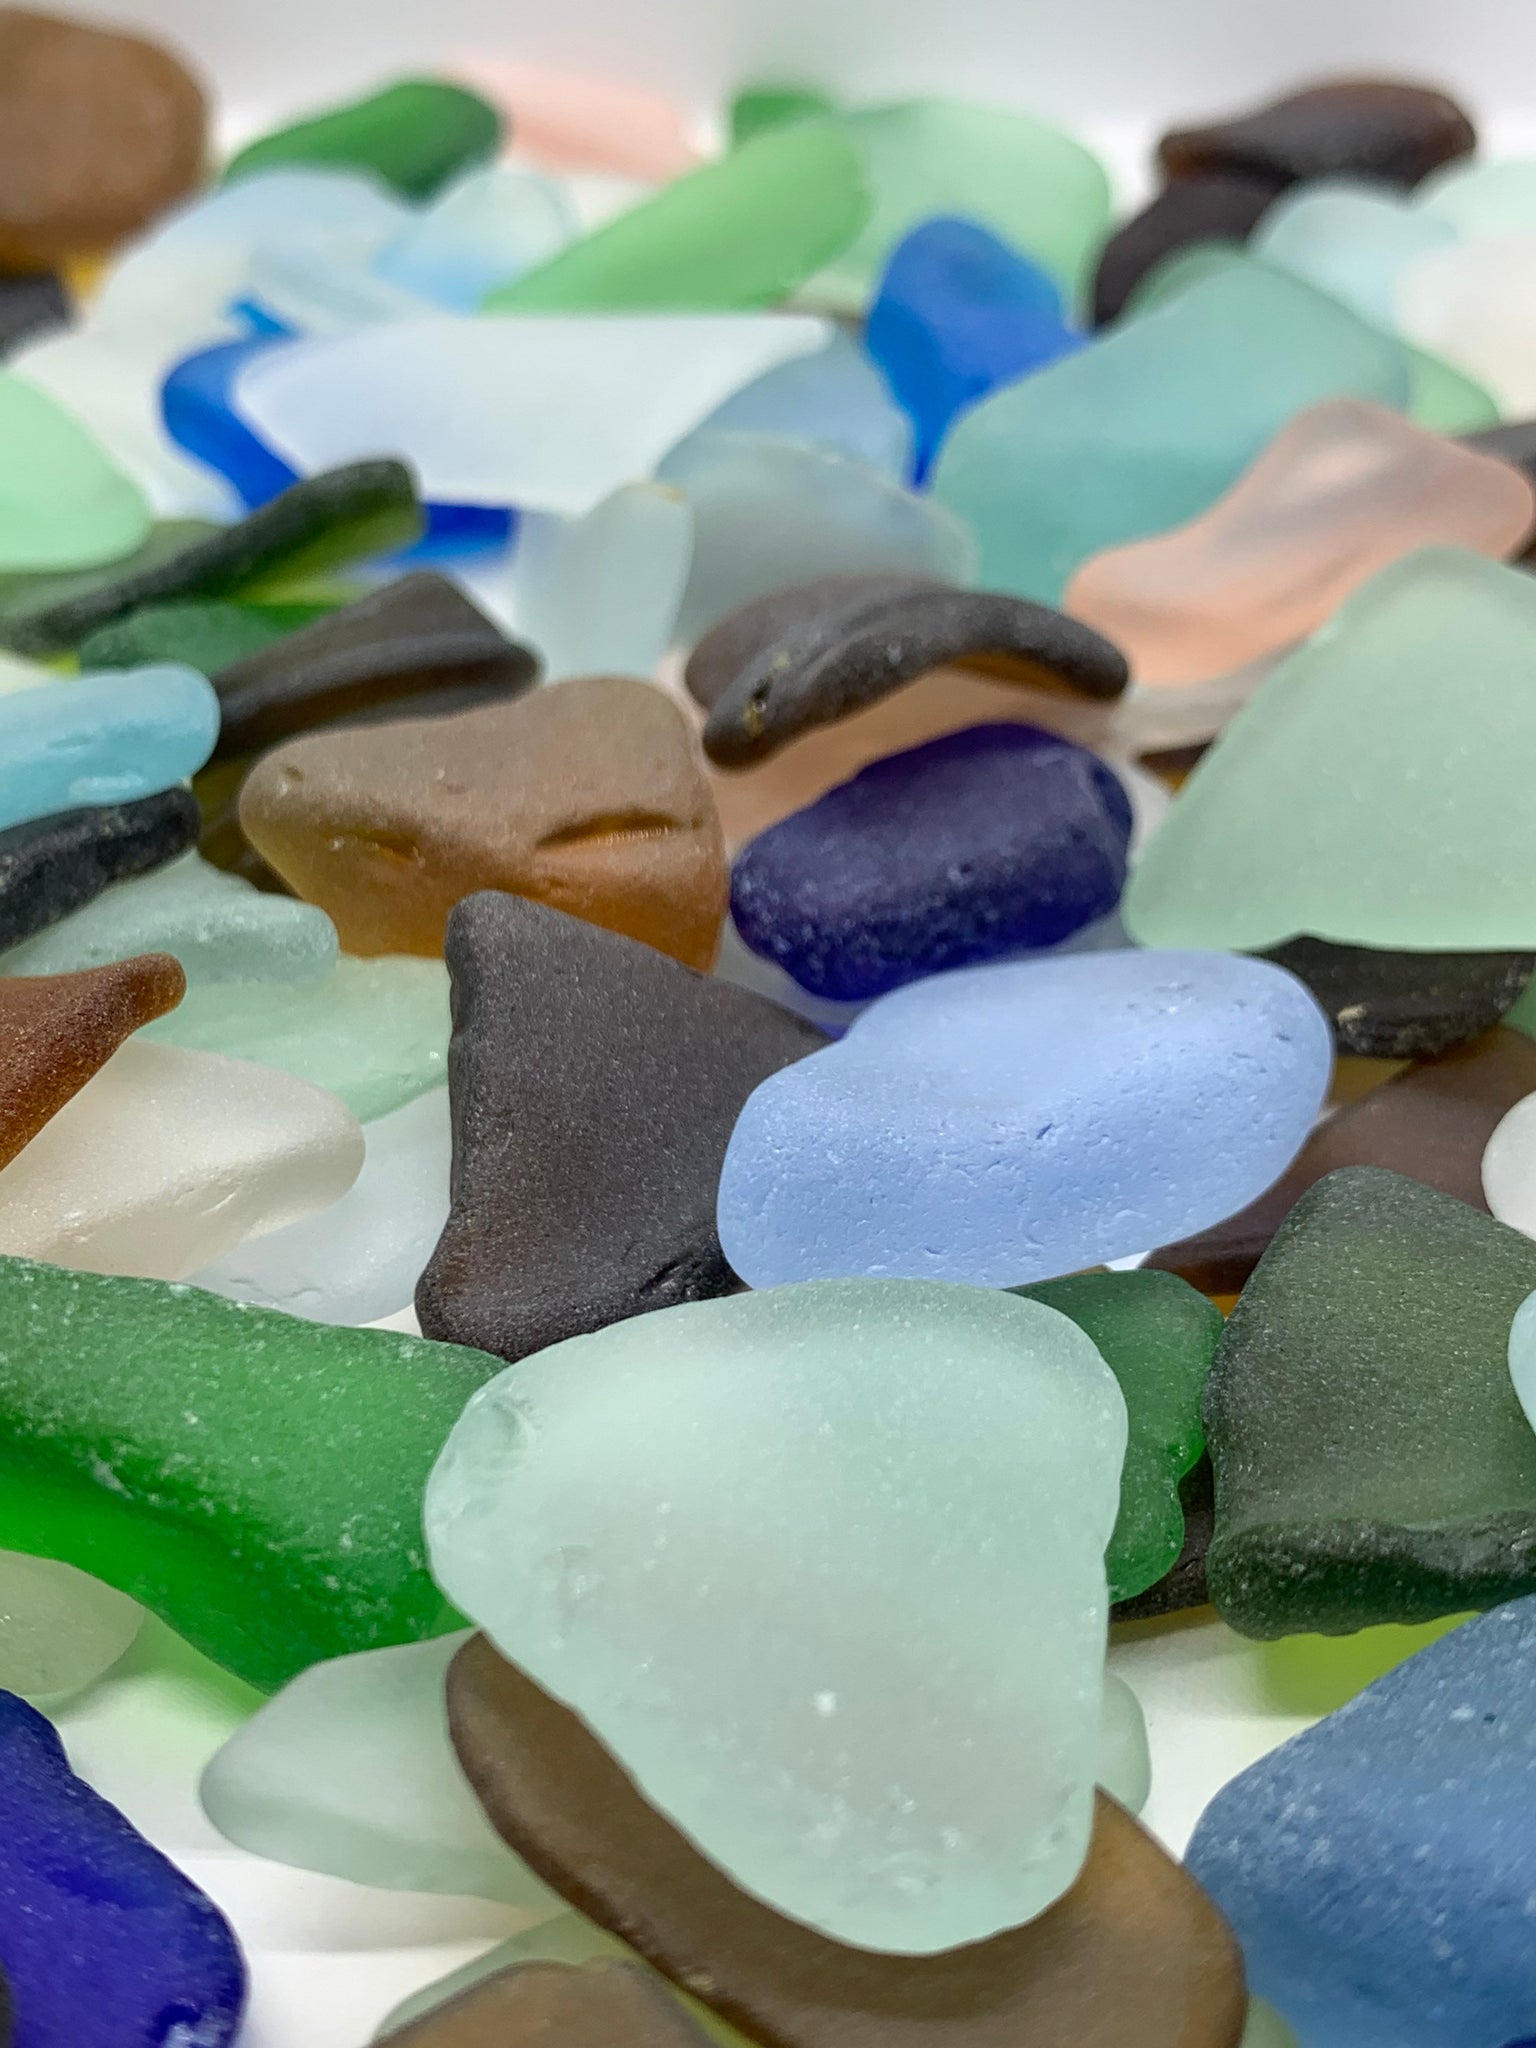 LARGE Lot of Multi English Sea Glass Pieces - LOT 1628